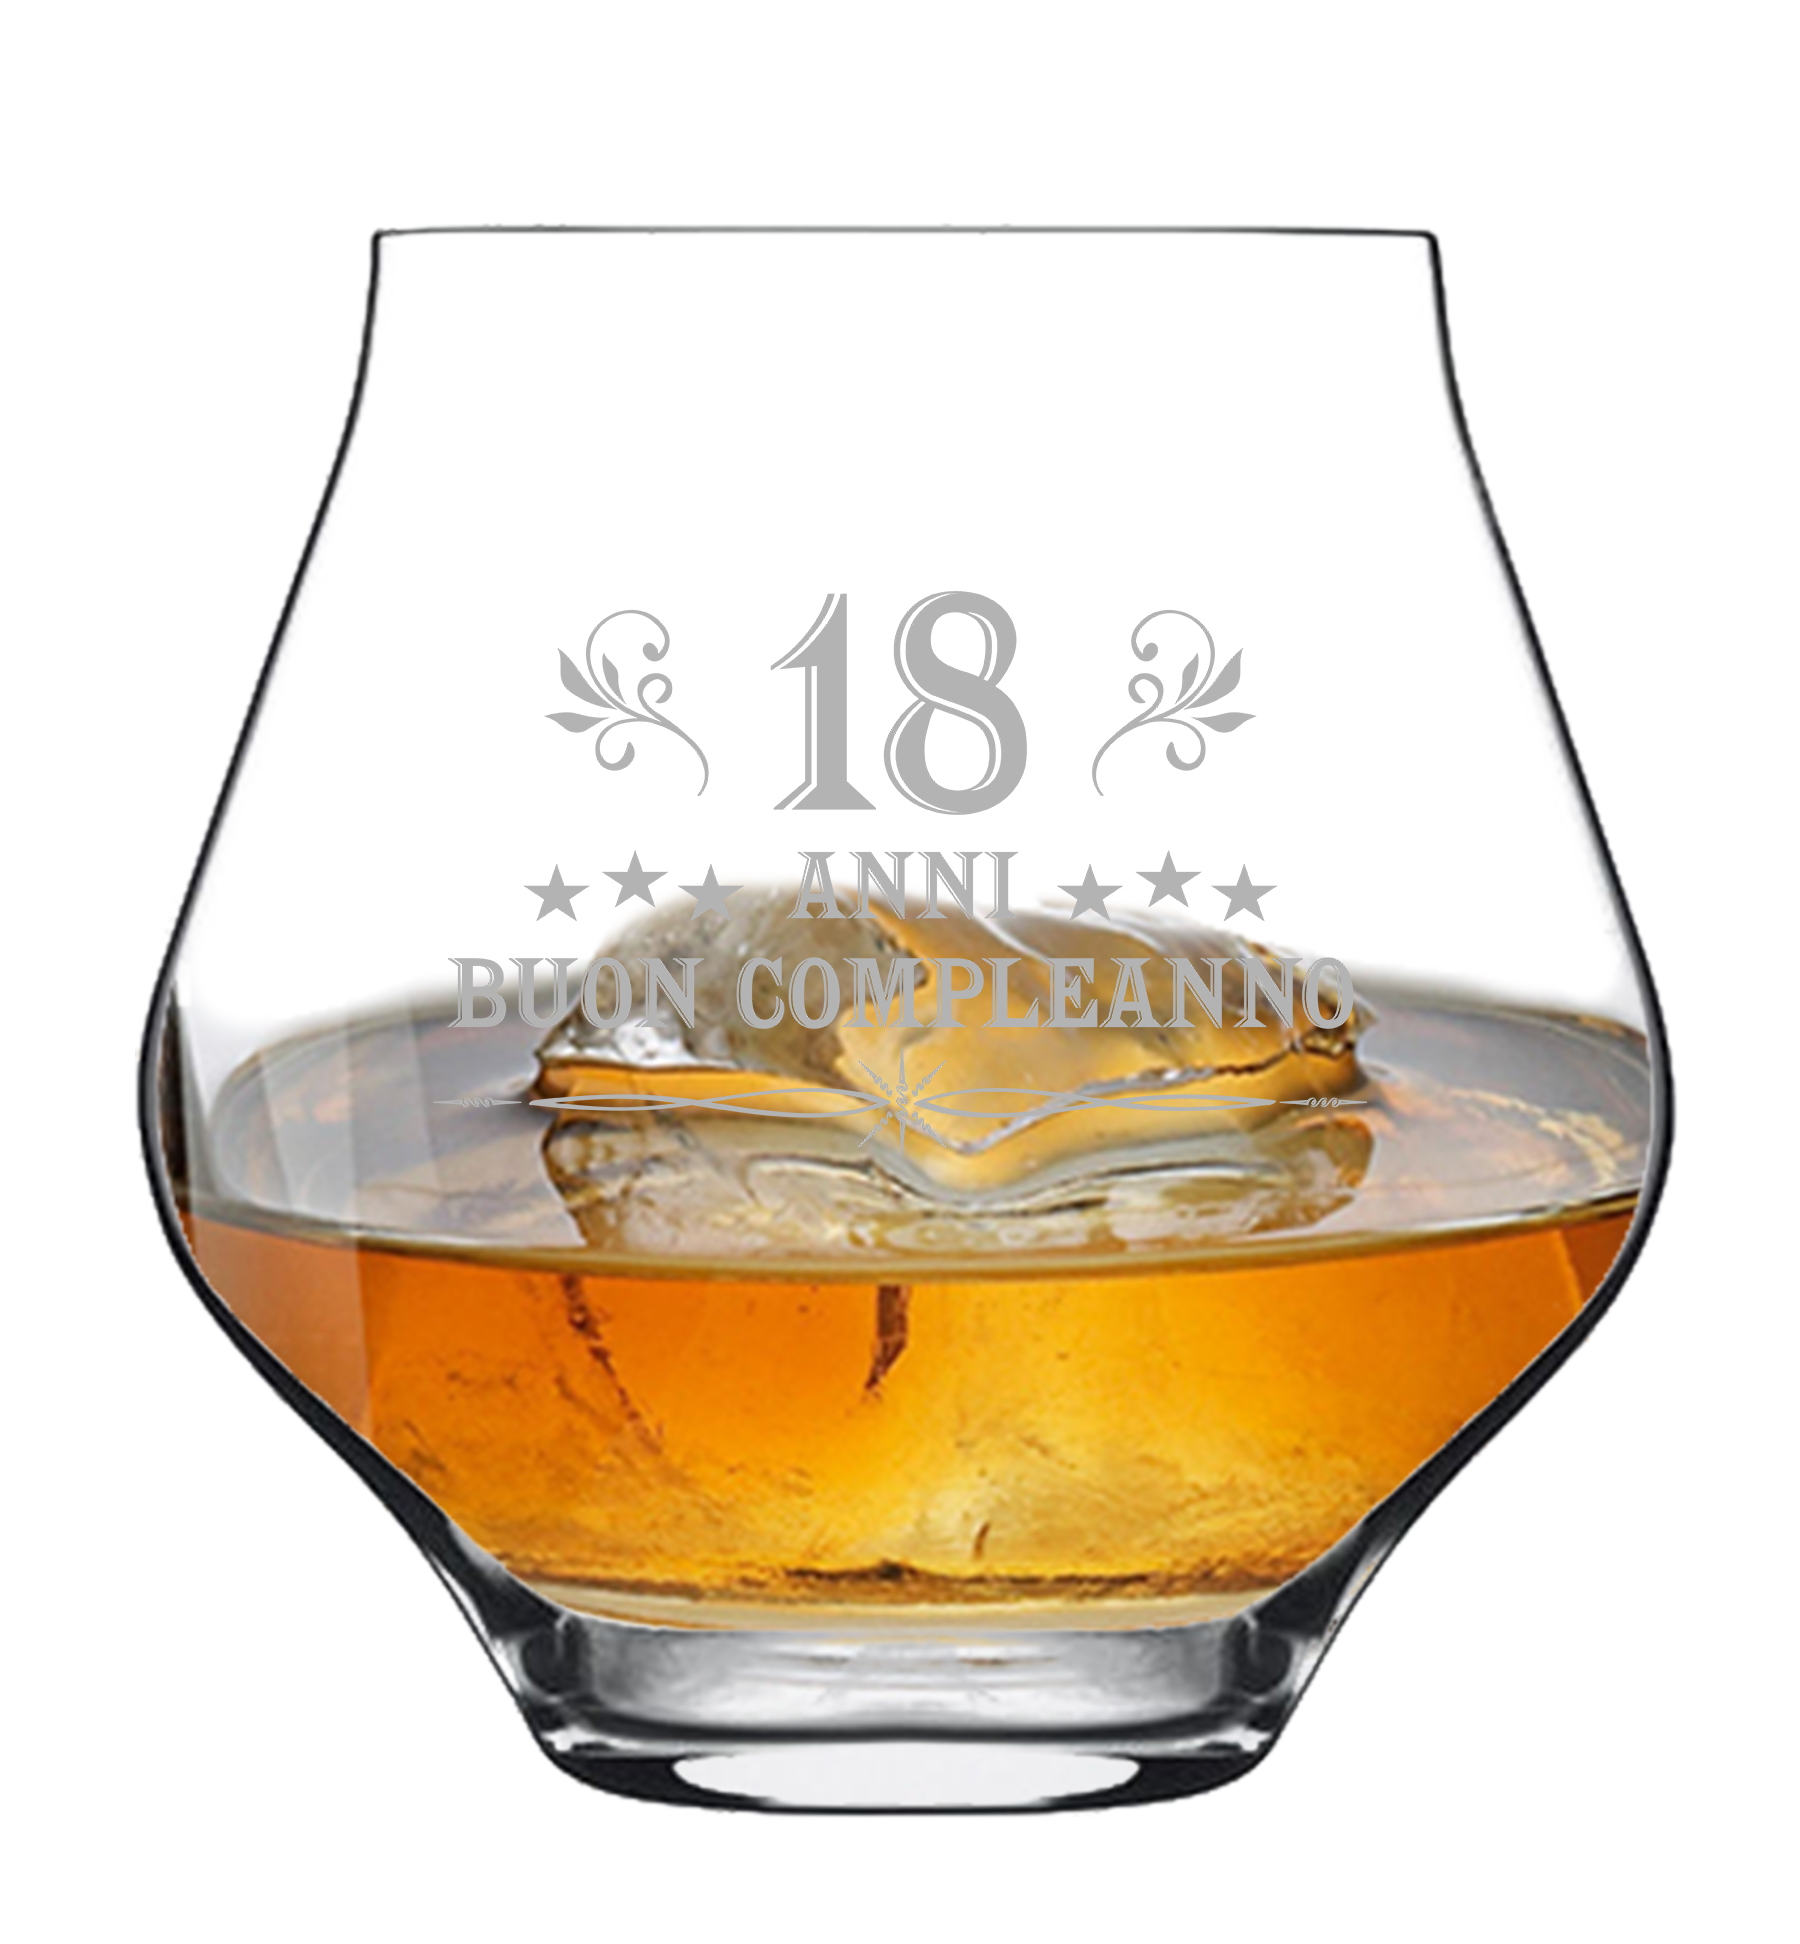 https://colorfamily.it/wp-content/uploads/2022/12/whisky1-24.jpg